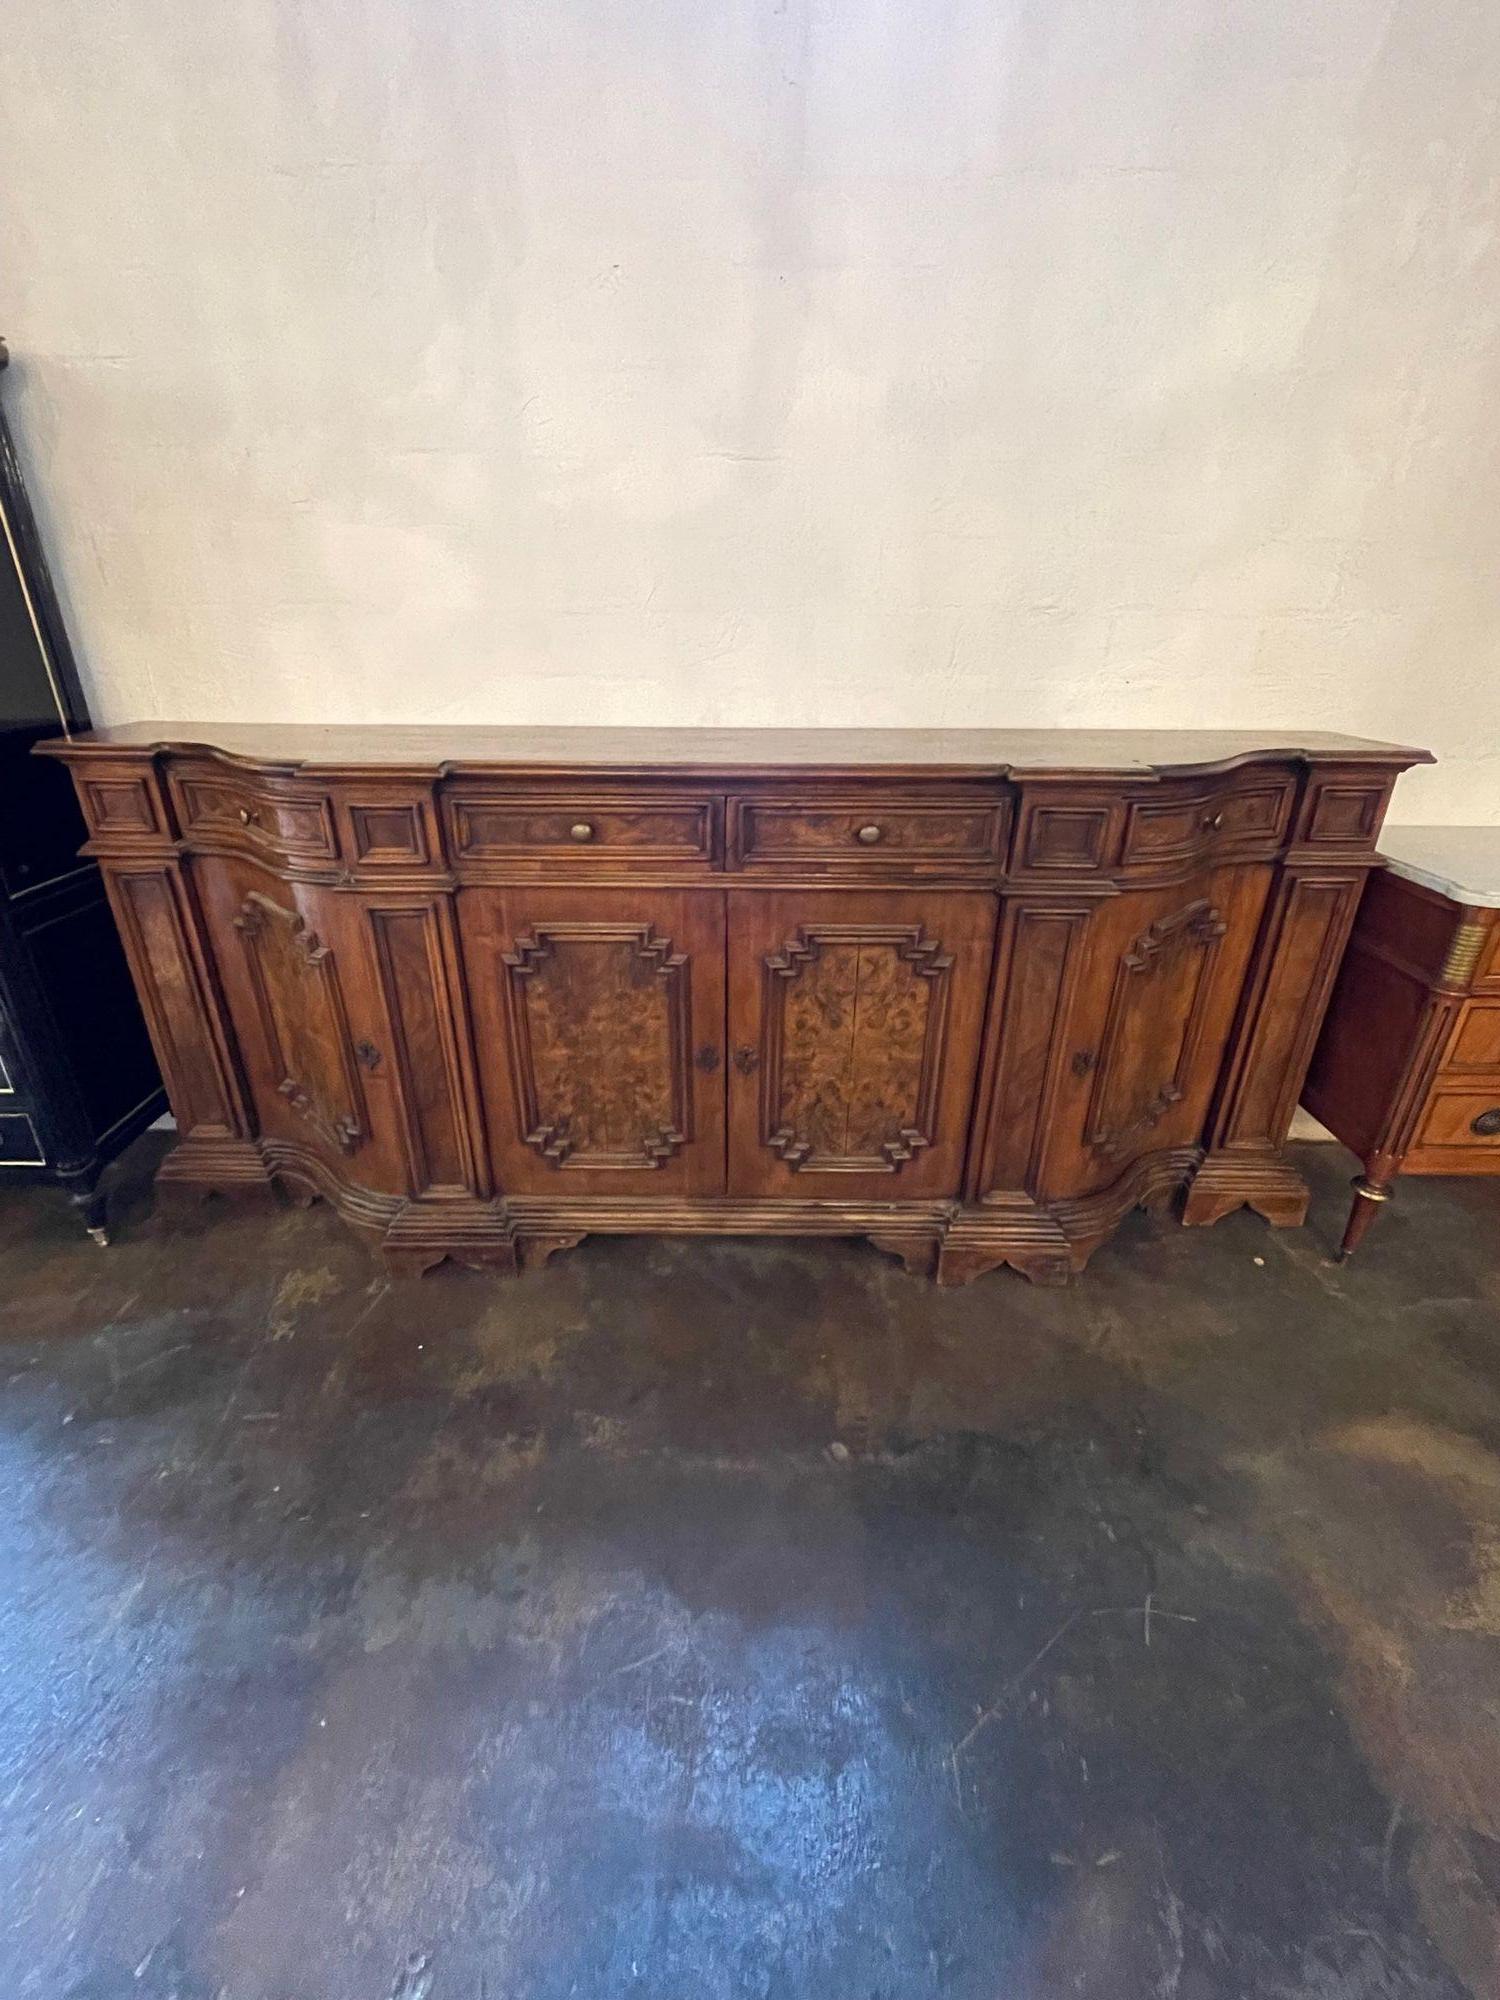 Very fine 19th century large carved Tuscan sideboard. Made of beautiful walnut with lovely carvings and tons of storage. An exceptional piece!